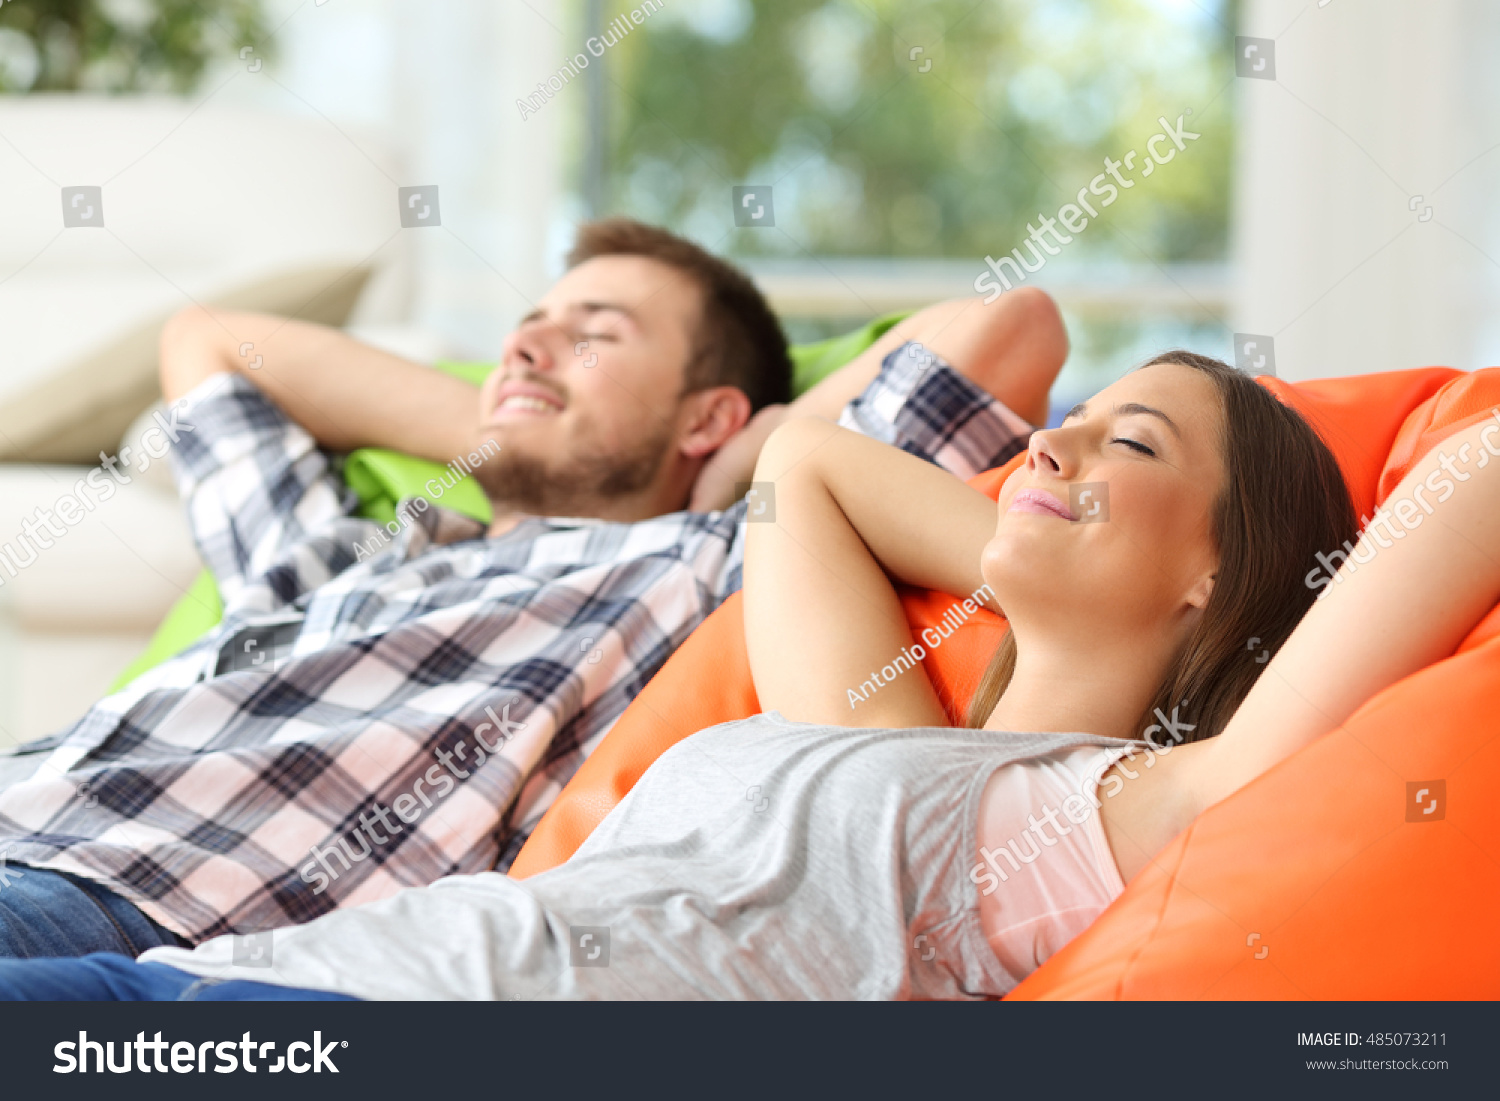 Couple or roommates relaxing lying on comfortable poufs in the living room at home #485073211